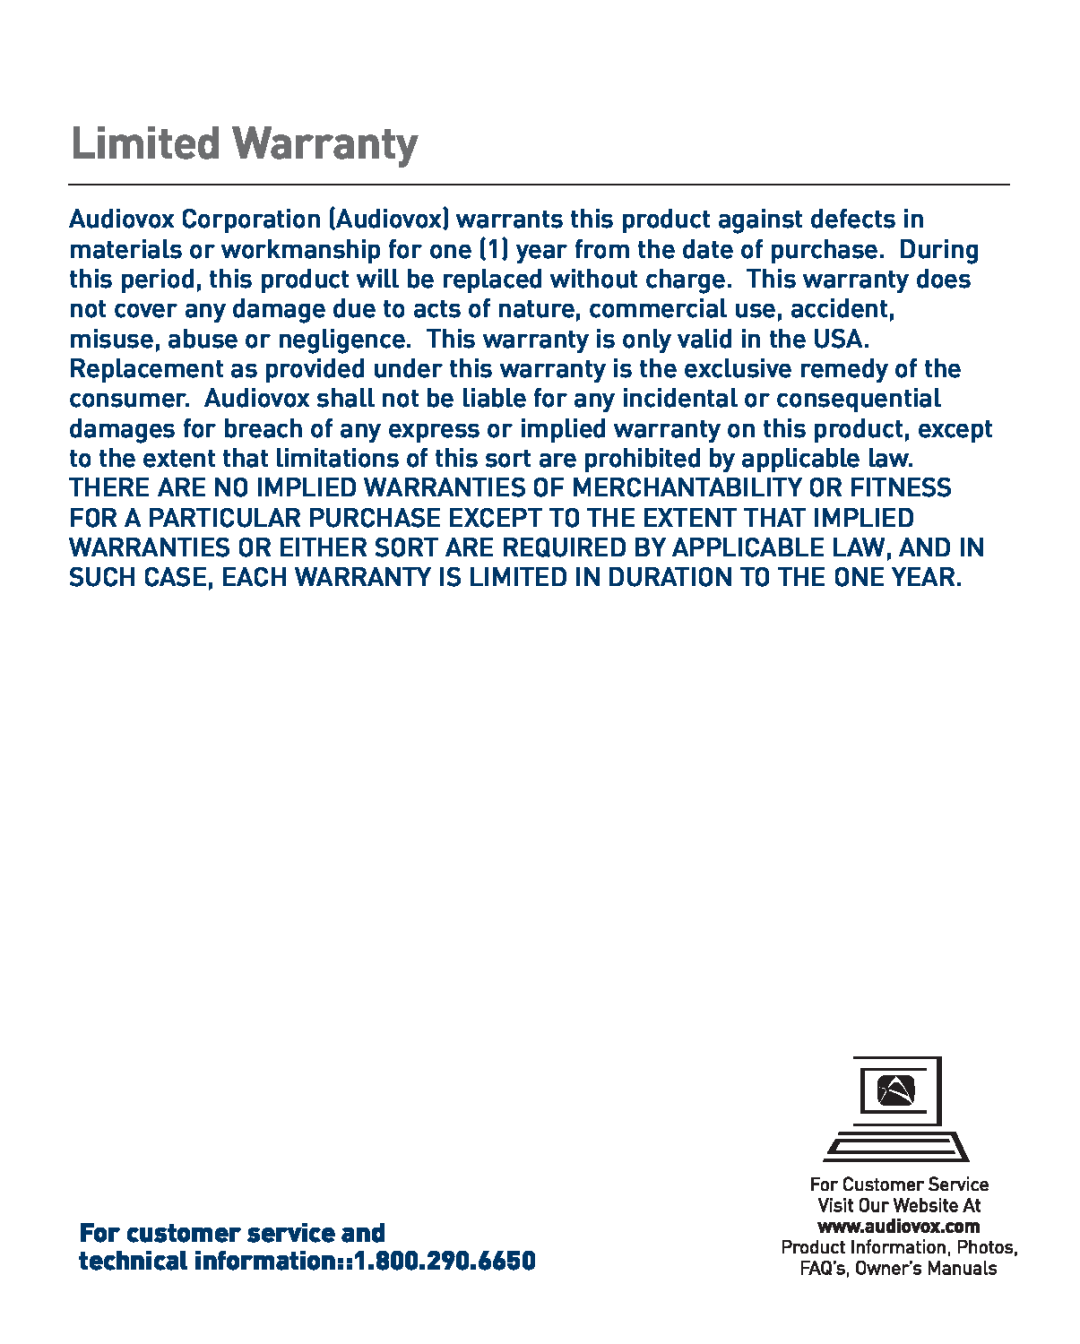 Audiovox VR-1 owner manual Limited Warranty, For customer service and technical information1.800.290.6650 